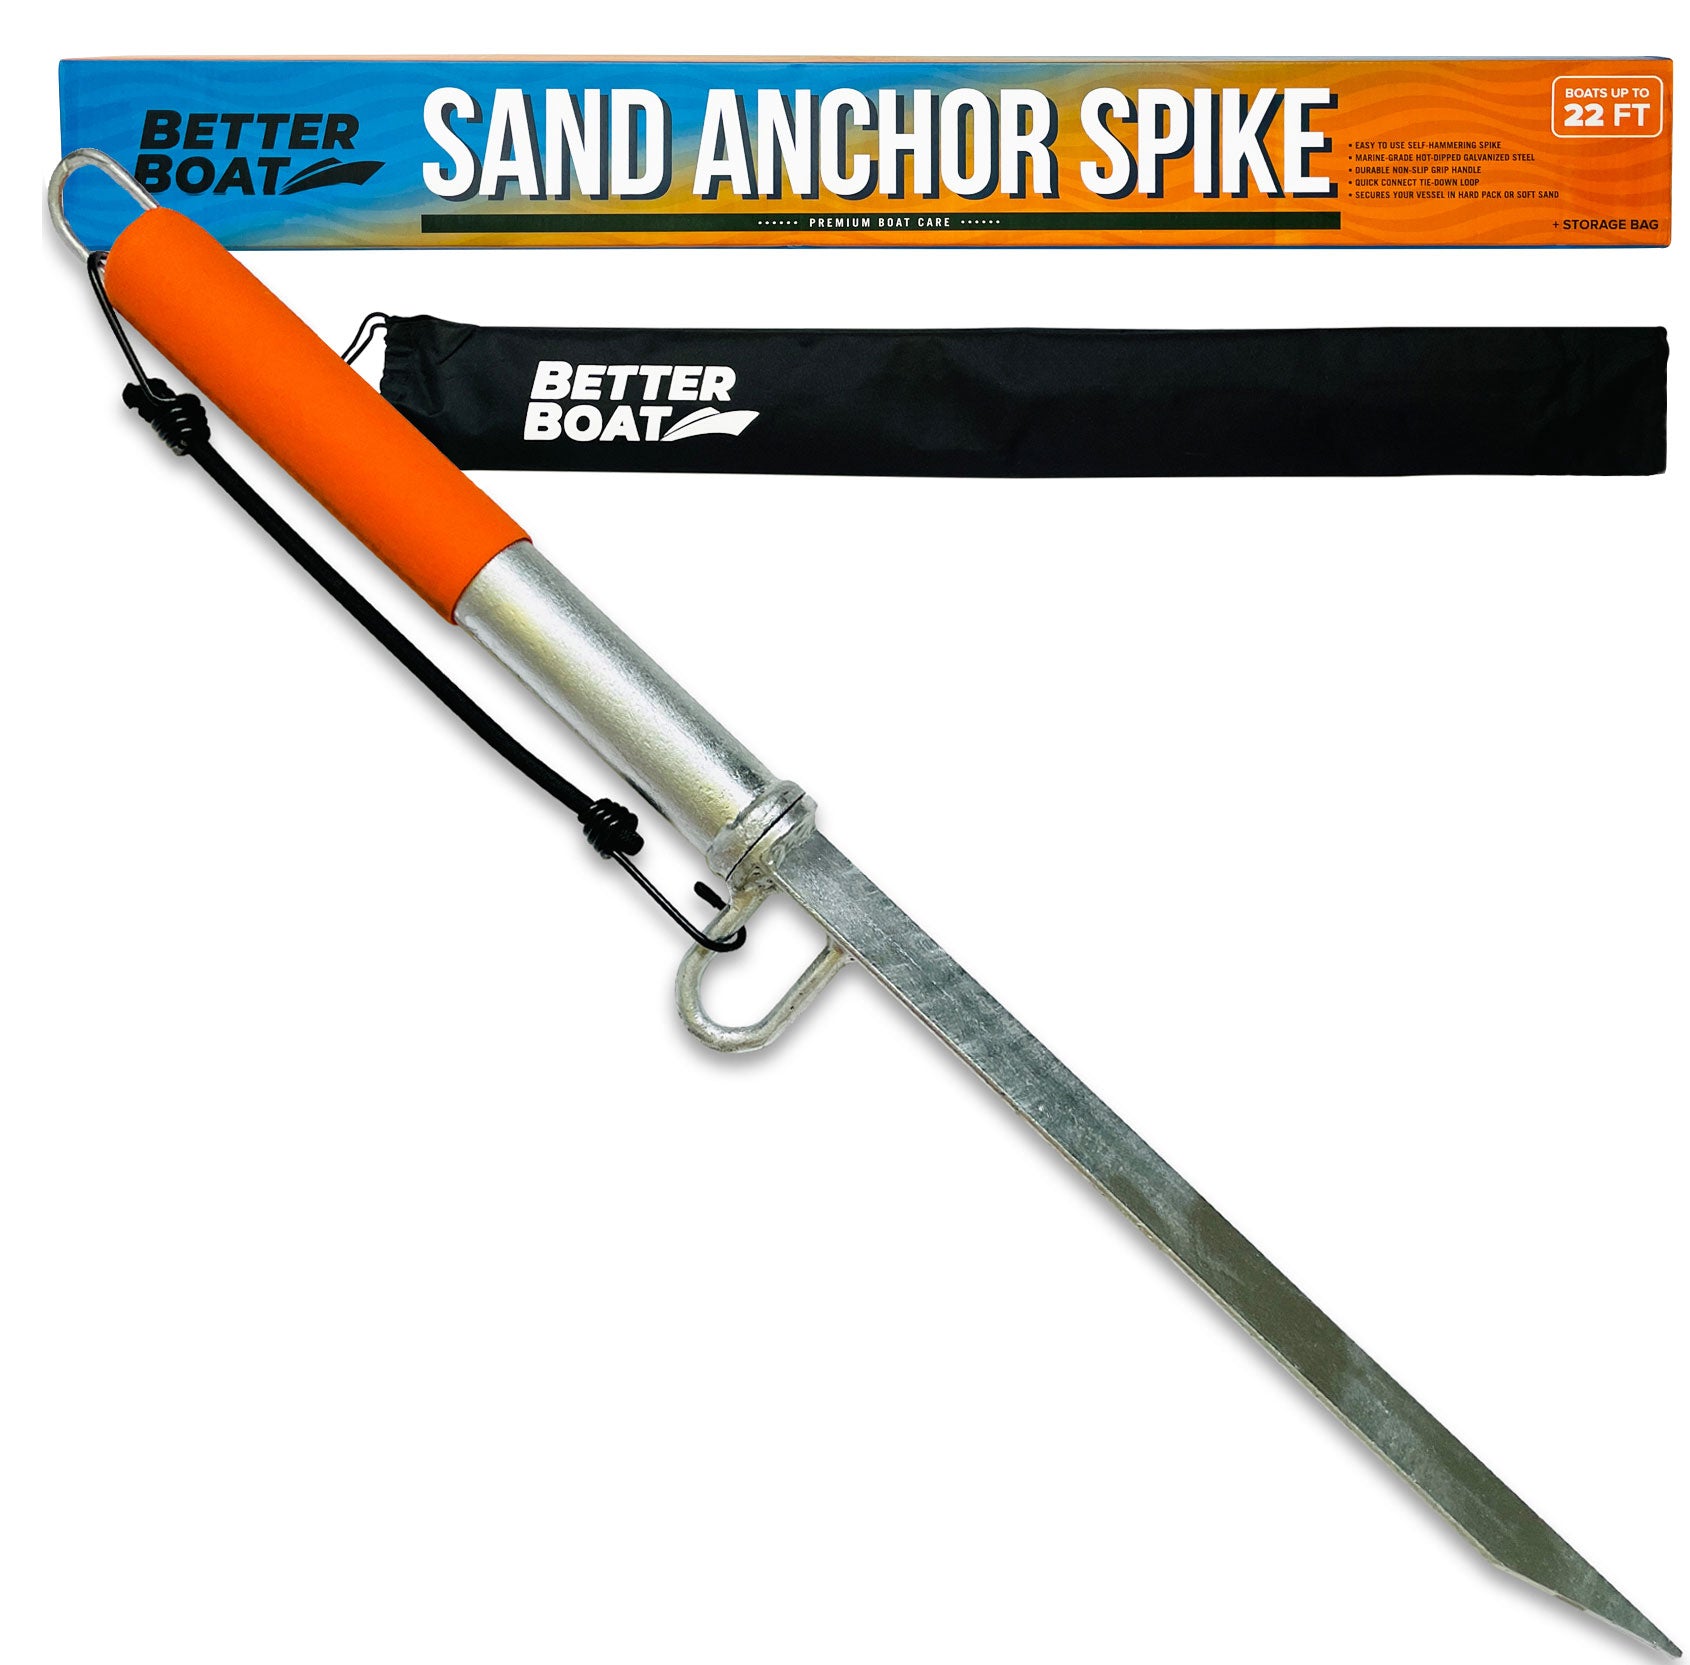 VEITHI 18 Sand Anchor for Boat, Aluminum Spike Beach Anchor for Boats, Jet  Skis & PWCs Design Keeps Your Watercraft Securely Anchored Near Shore